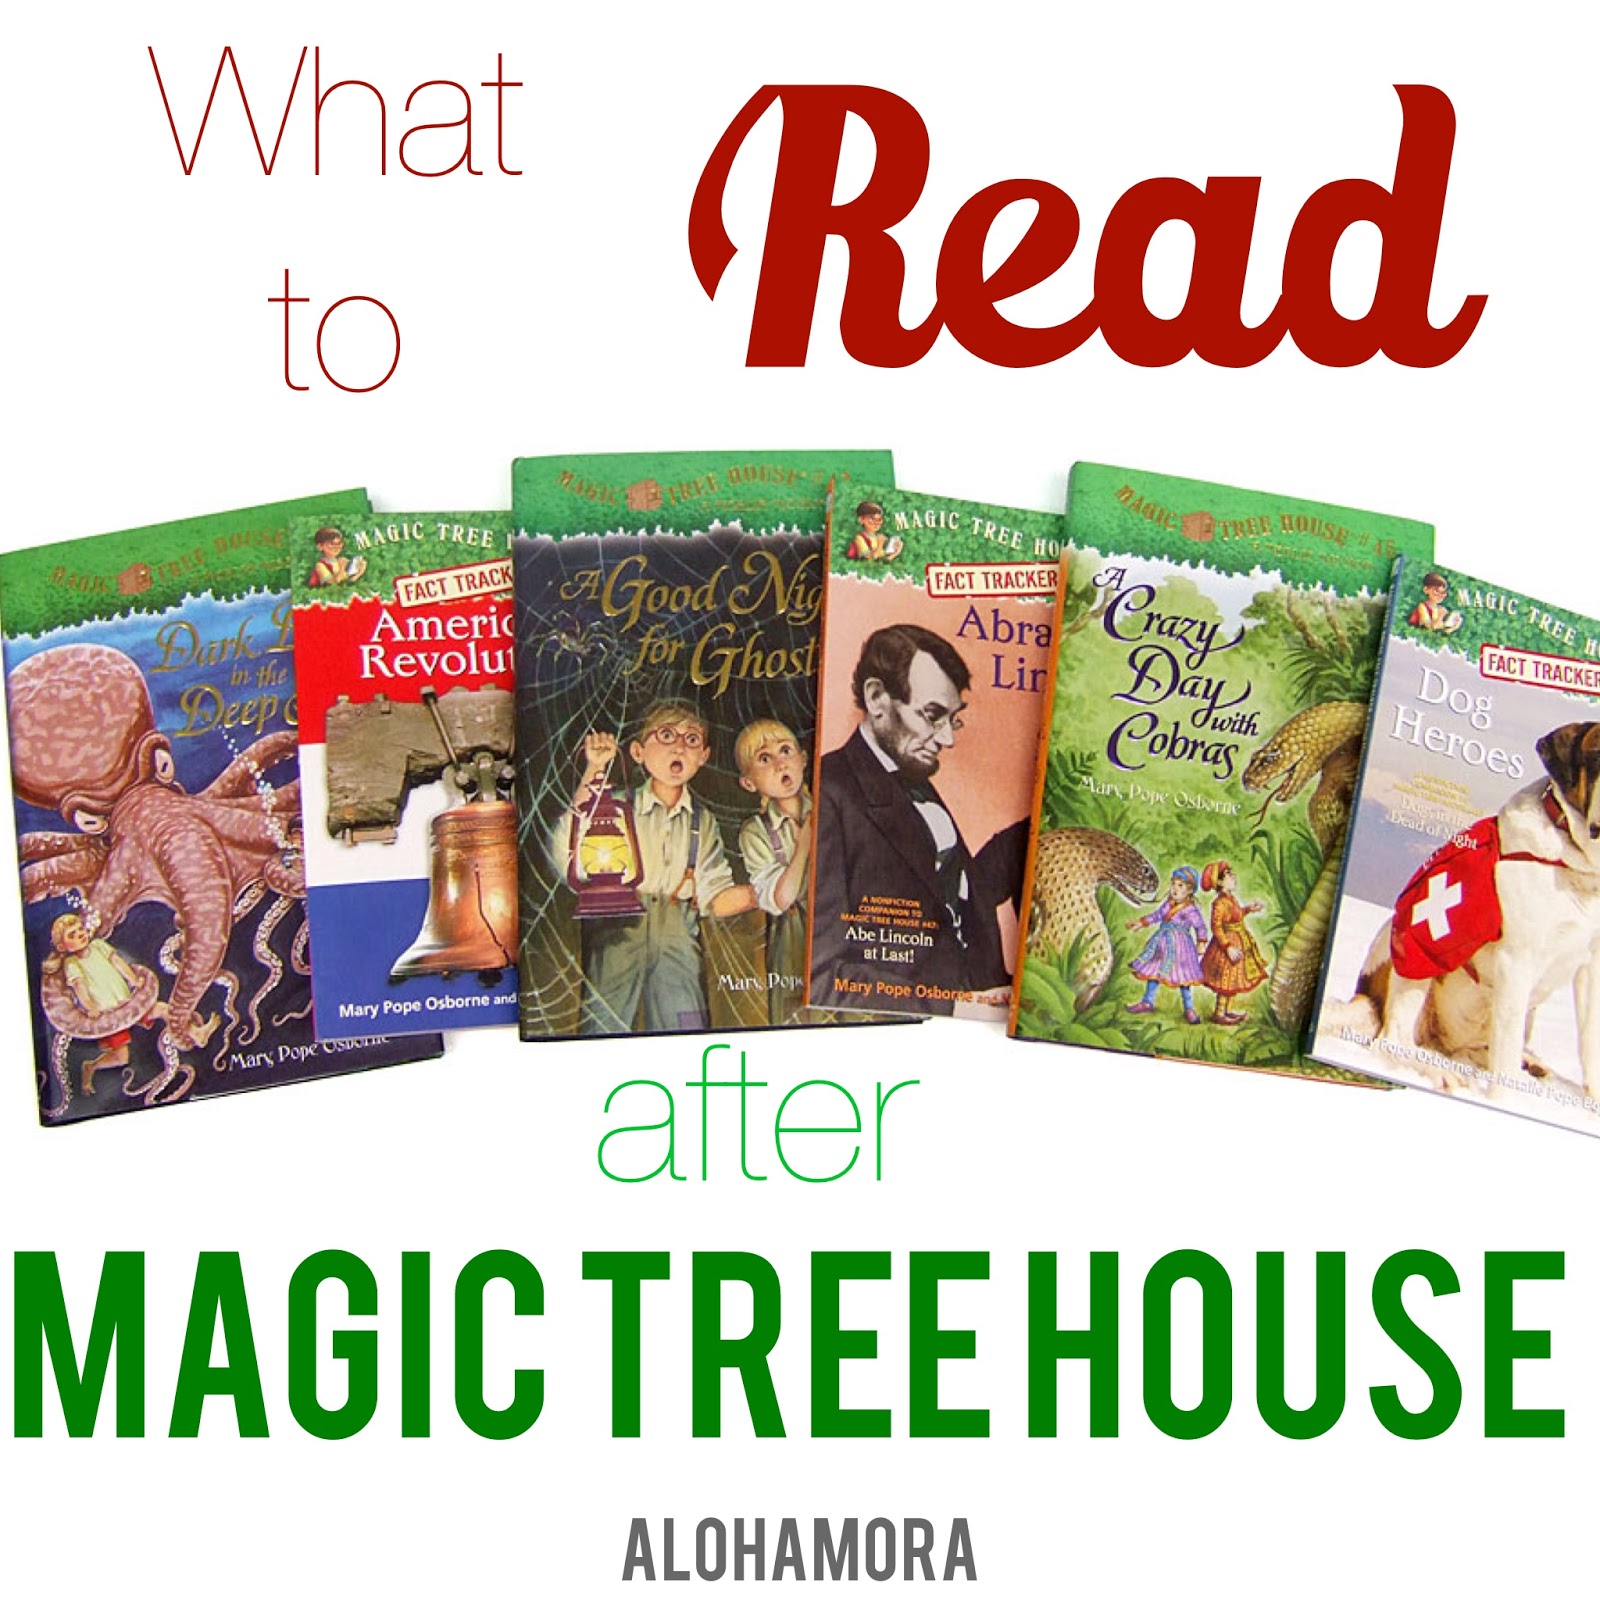 alohamora: open a book: what to read after magic tree house